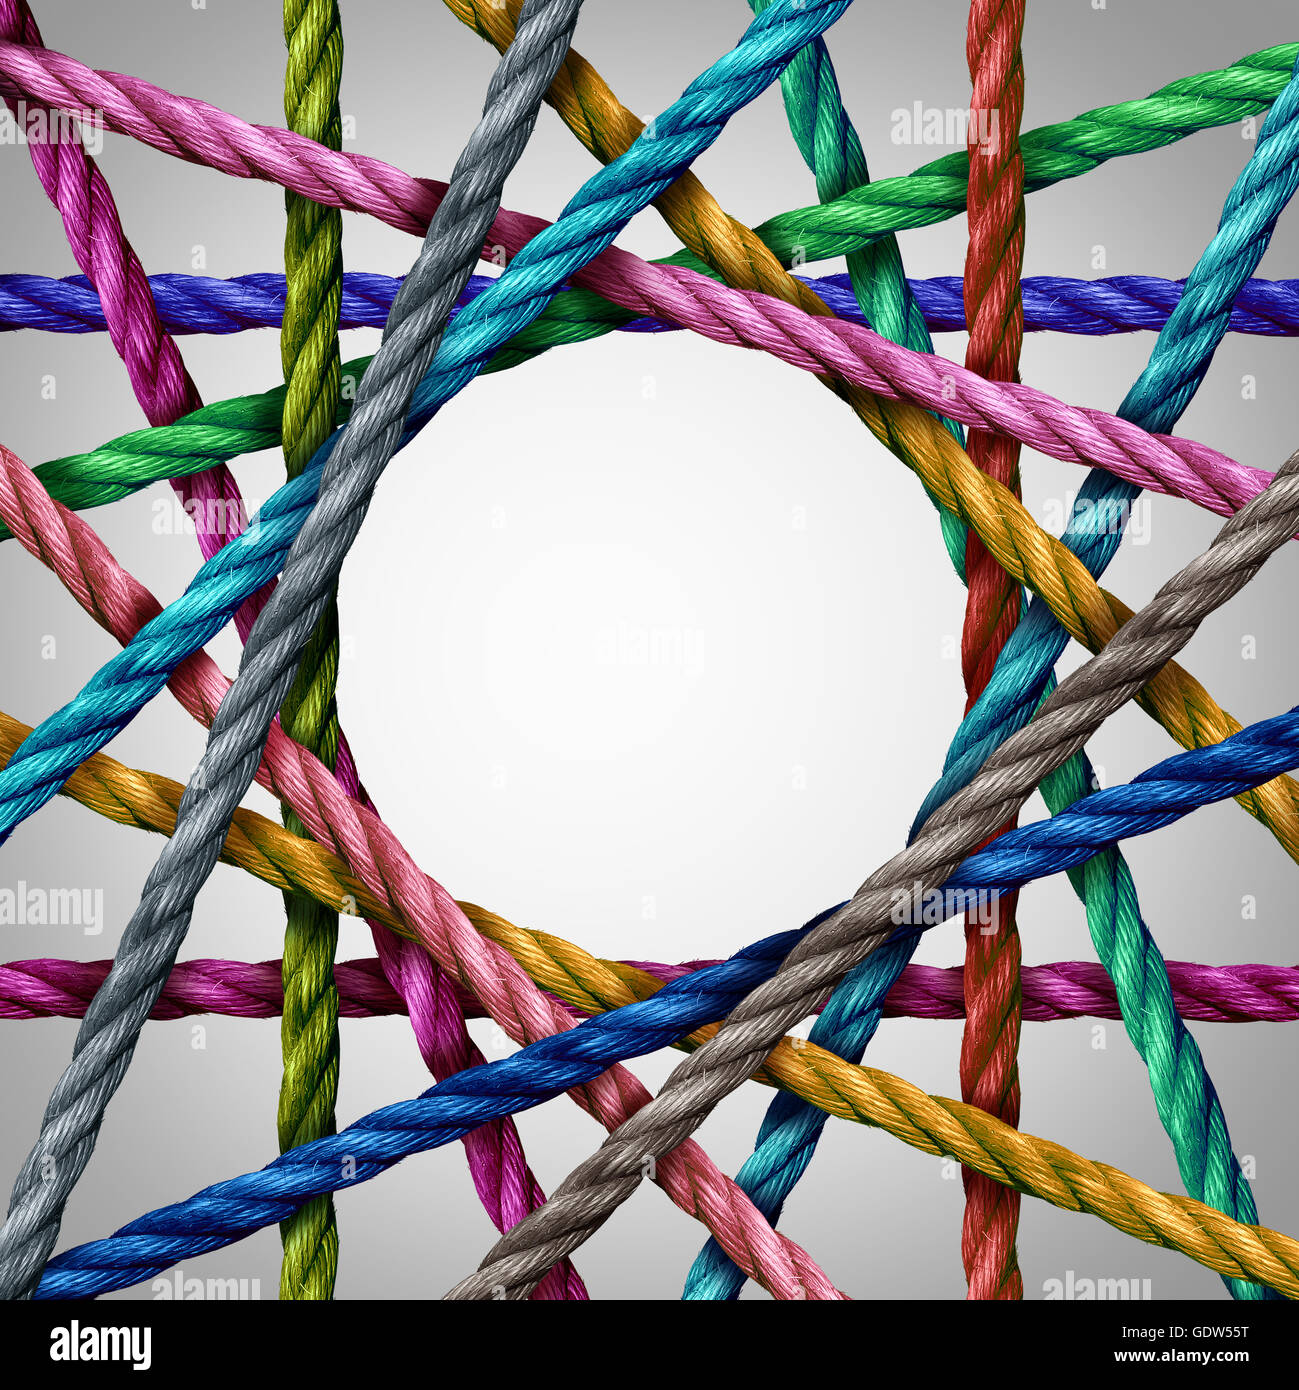 Connected divesisty and circle shaped group of ropes creating a centralized circular shape as a connect concept for business or Stock Photo